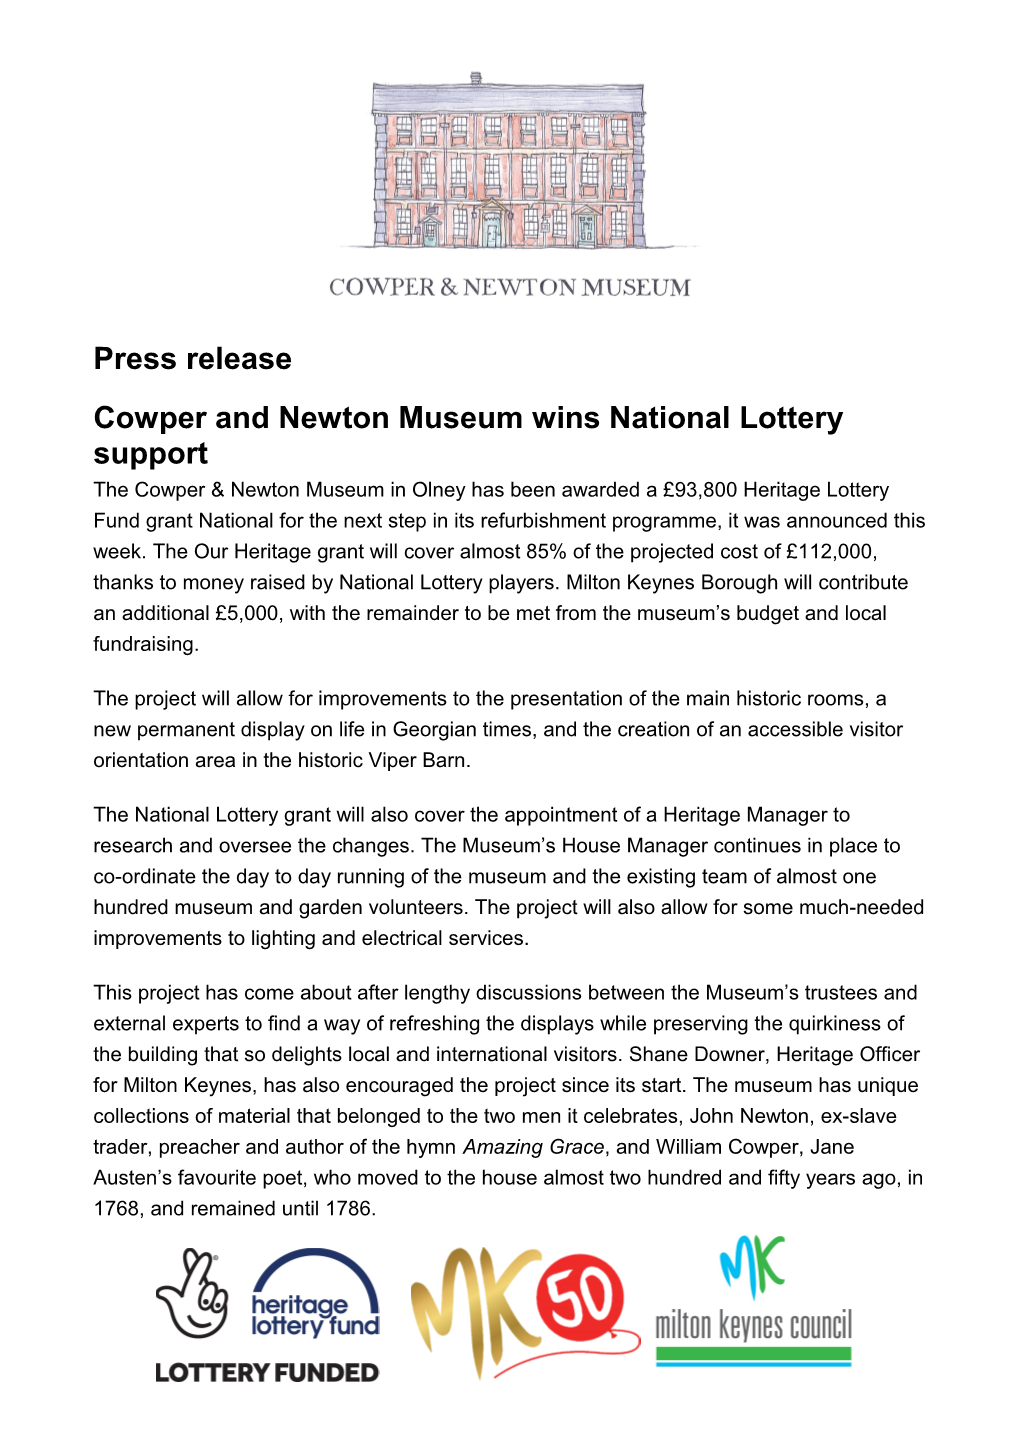 Cowper and Newton Museum Wins National Lottery Support